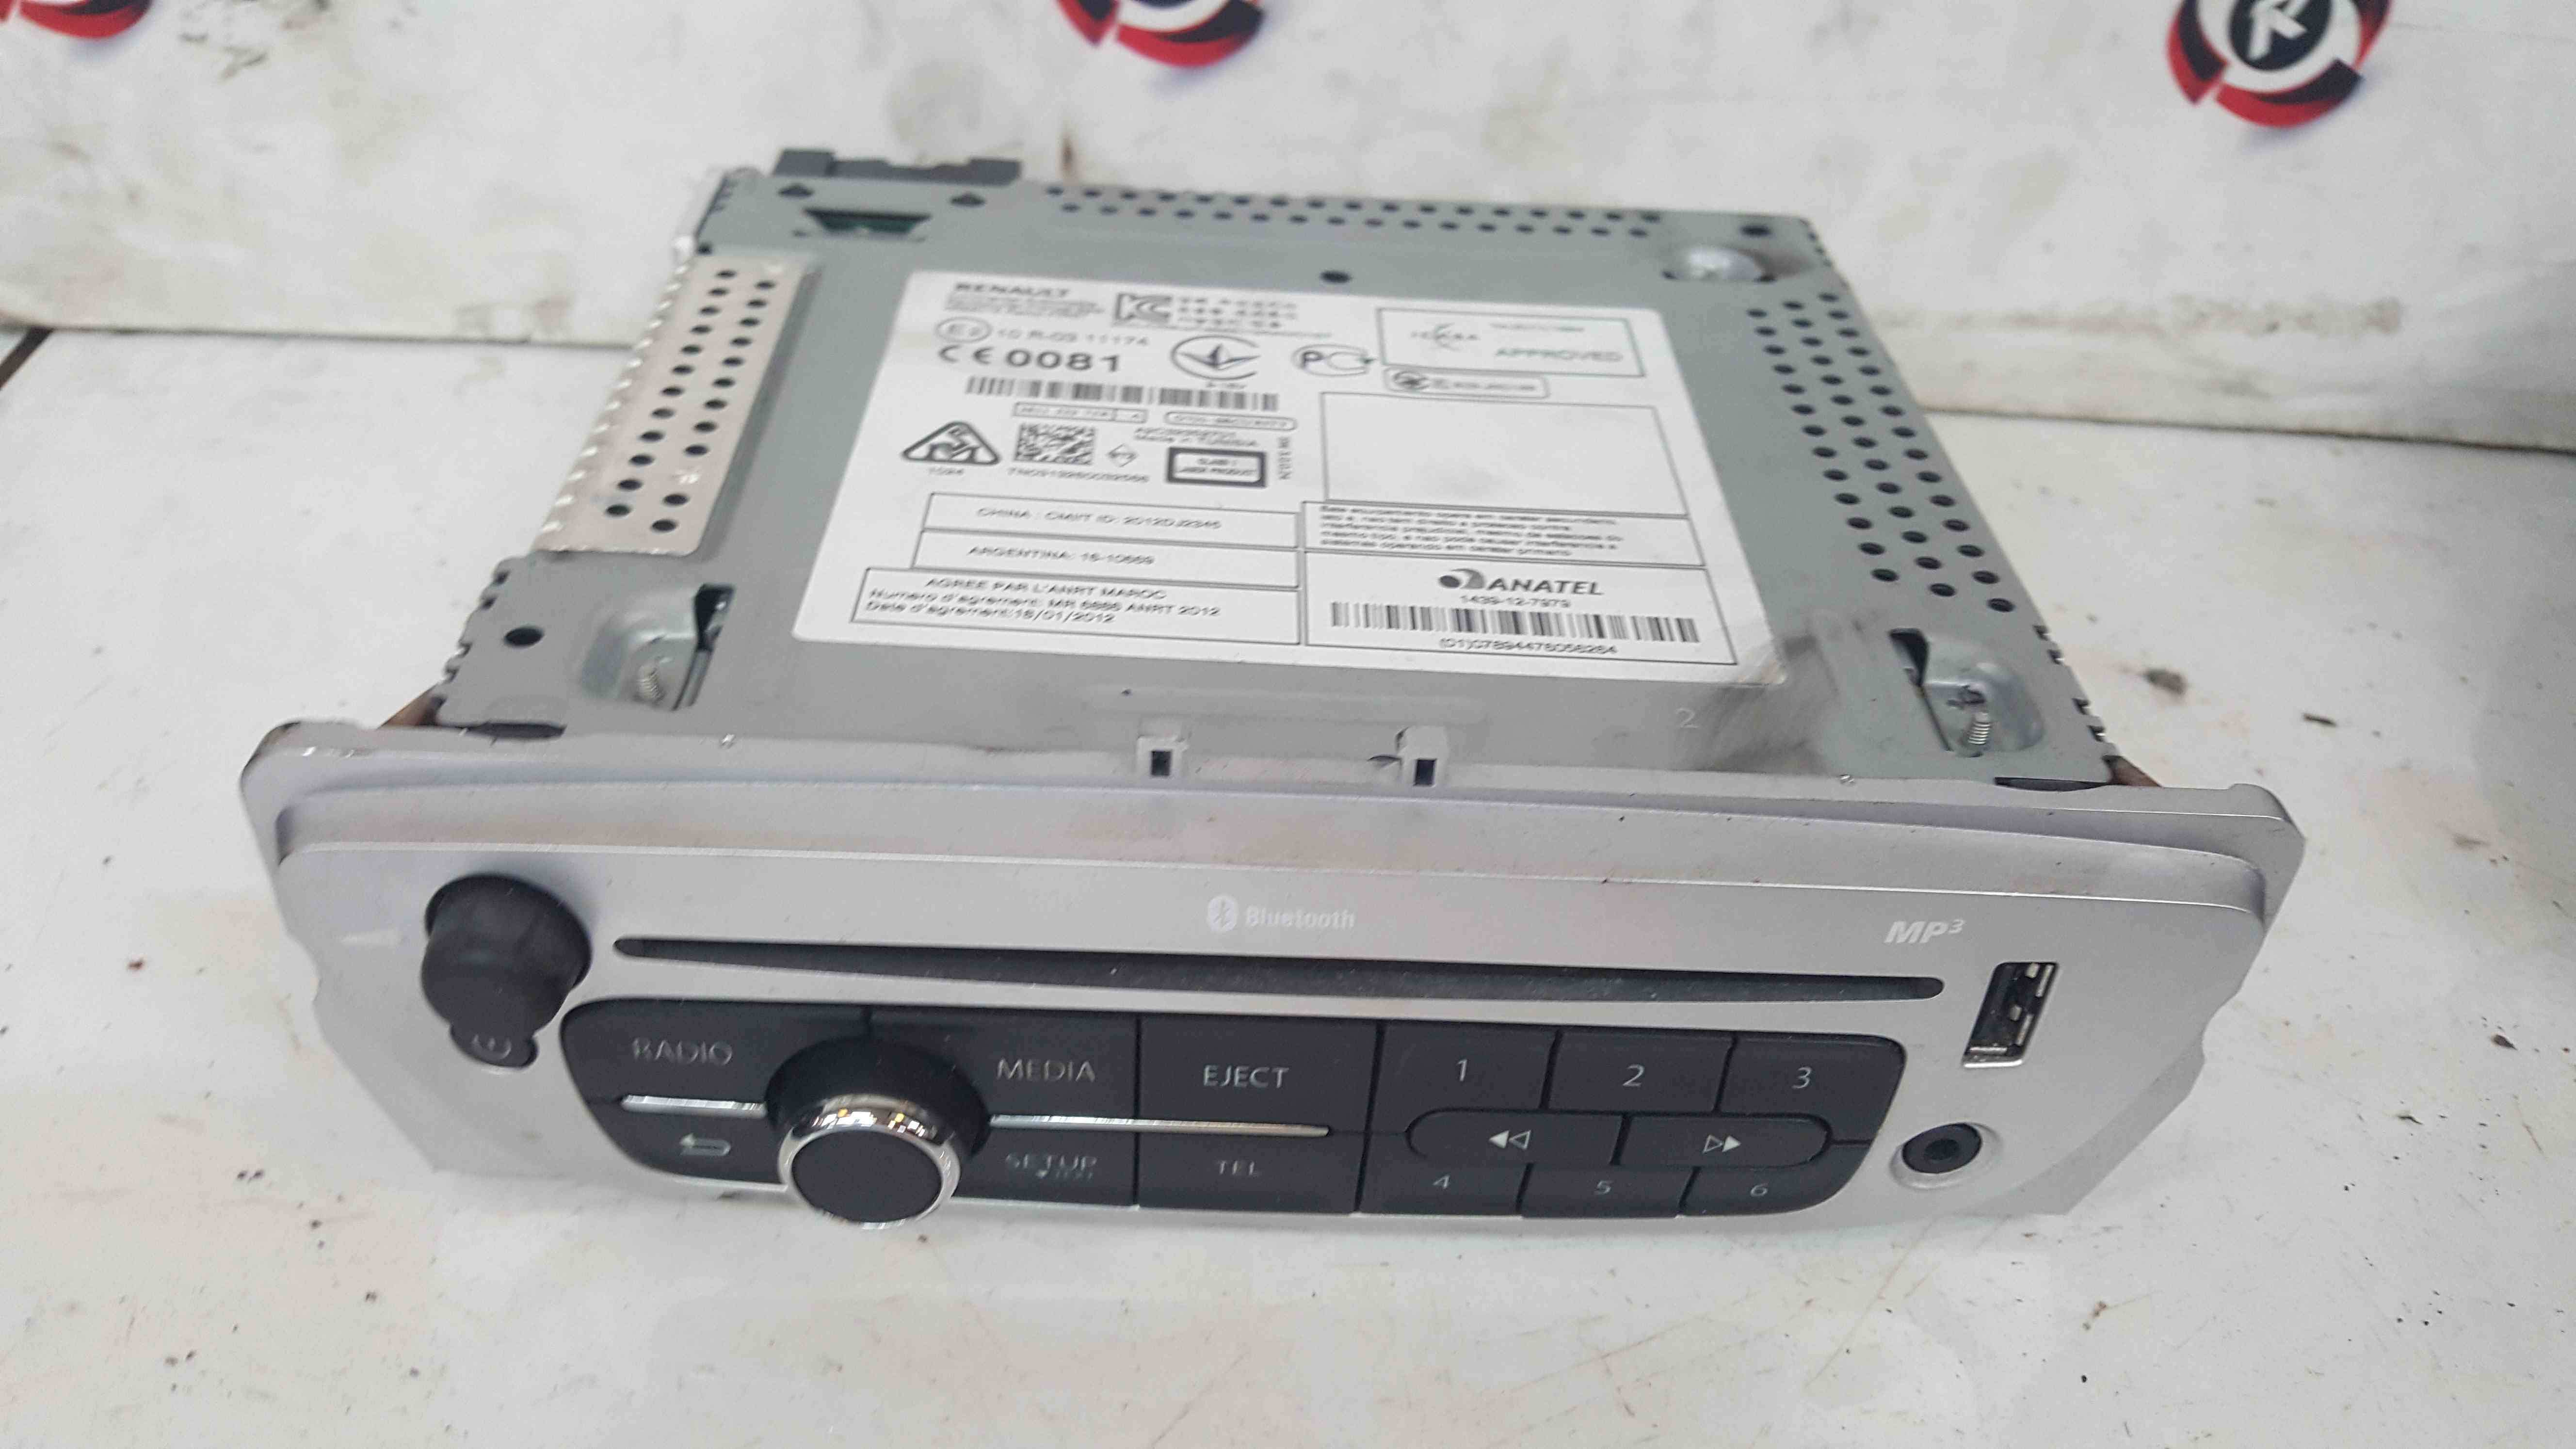 Renault Scenic MK3 2009-2016 Radio Media Cd Player USB AUX 281152275R -  Store - Renault Breakers - Used Renault Car Parts & Spares Specialist